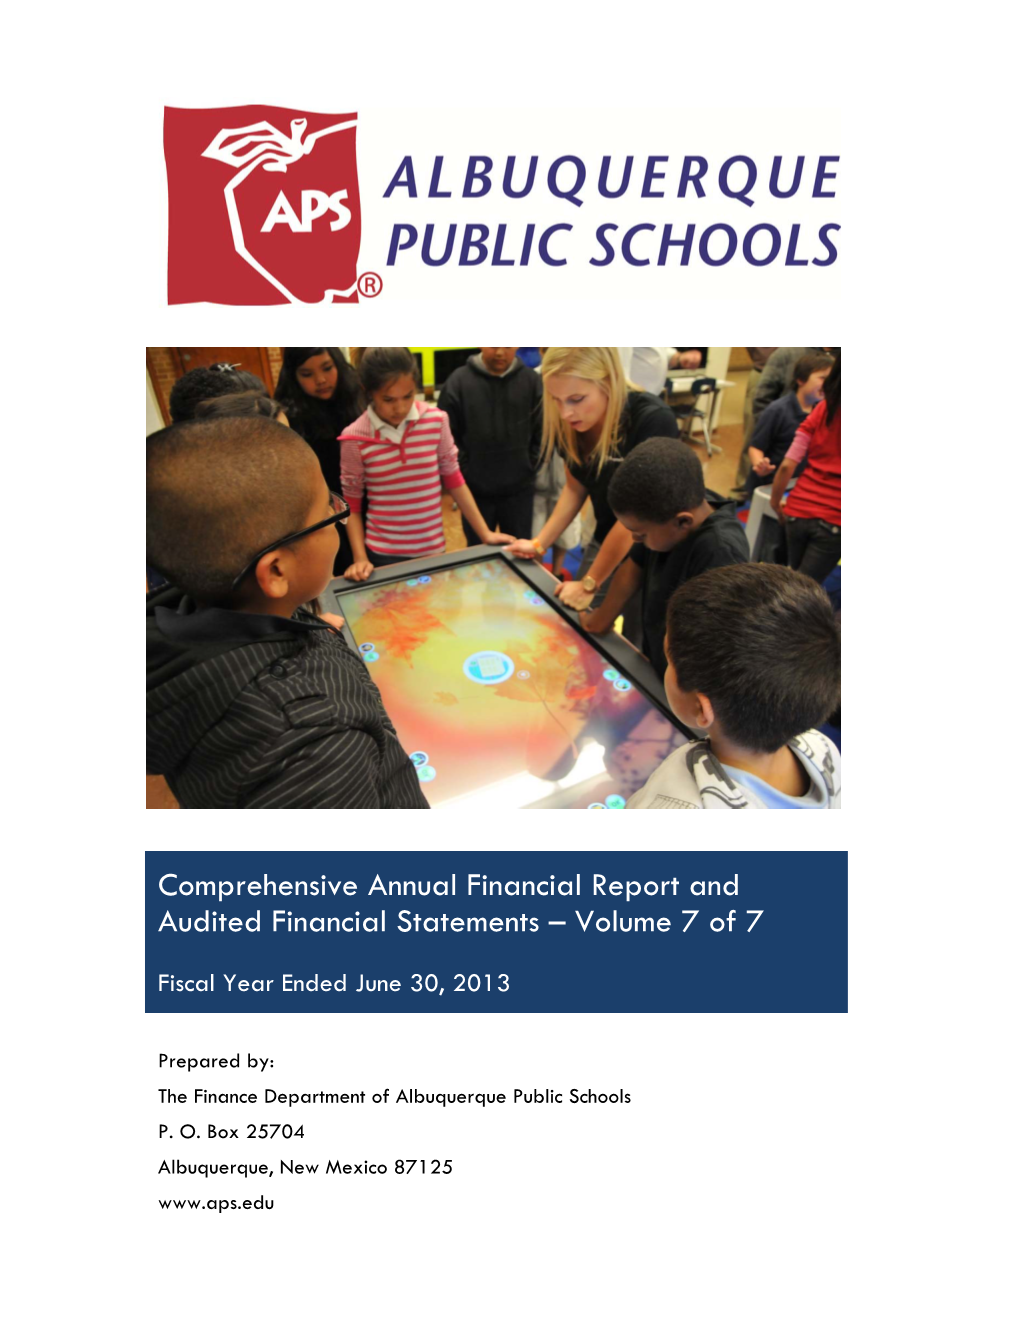 Comprehensive Annual Financial Report and Audited Financial Statements – Volume 7 of 7